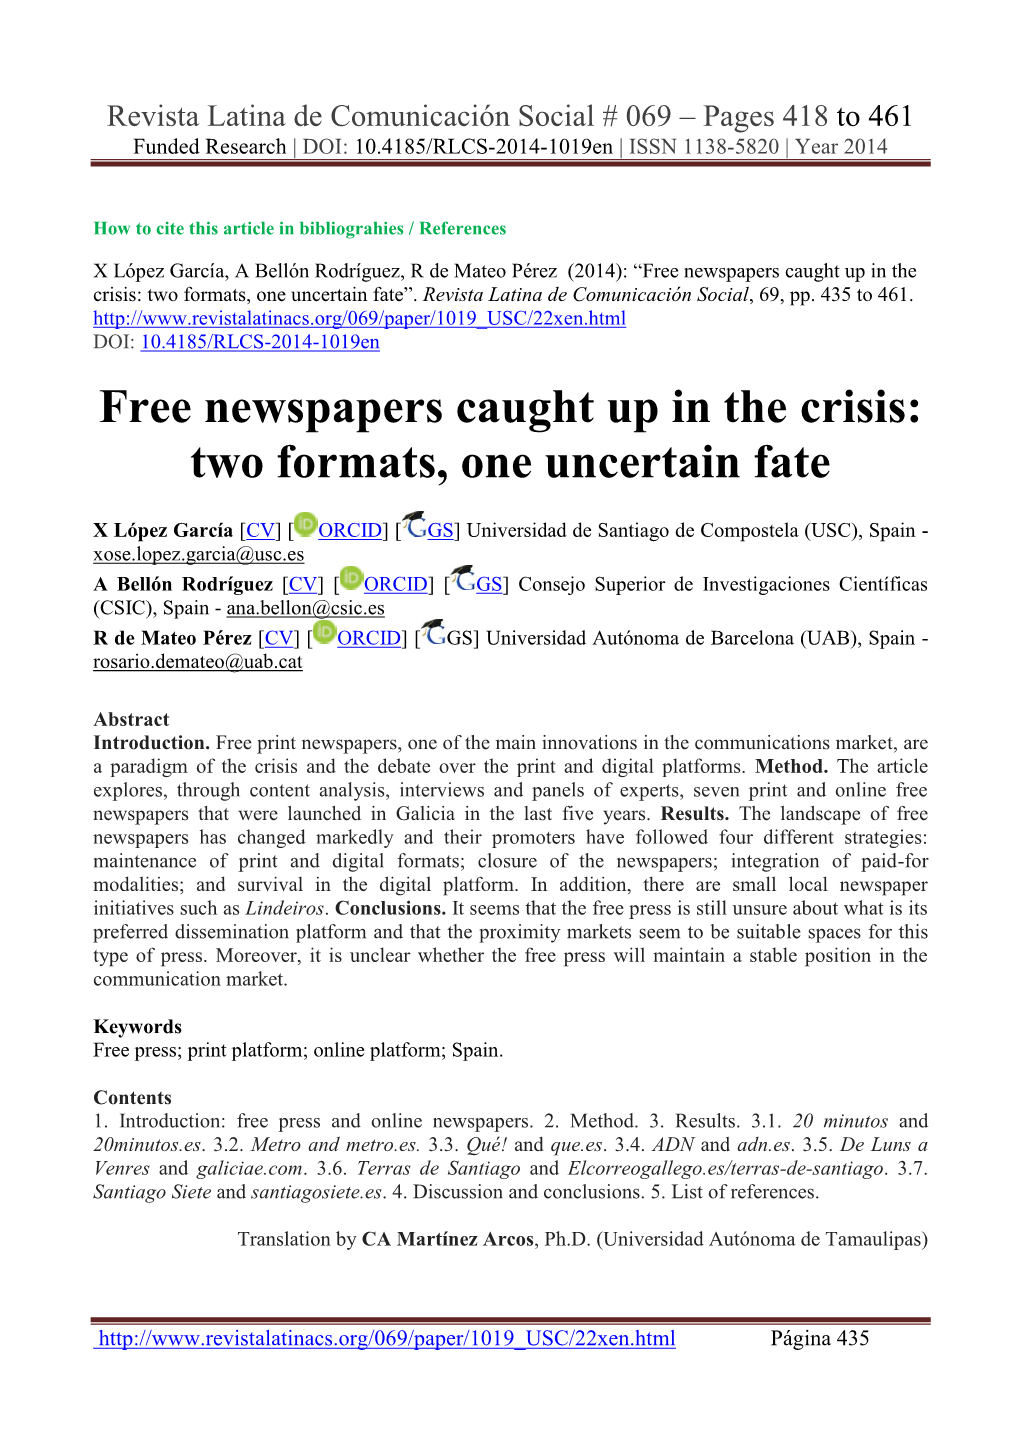 Free Newspapers Caught up in the Crisis: Two Formats, One Uncertain Fate”